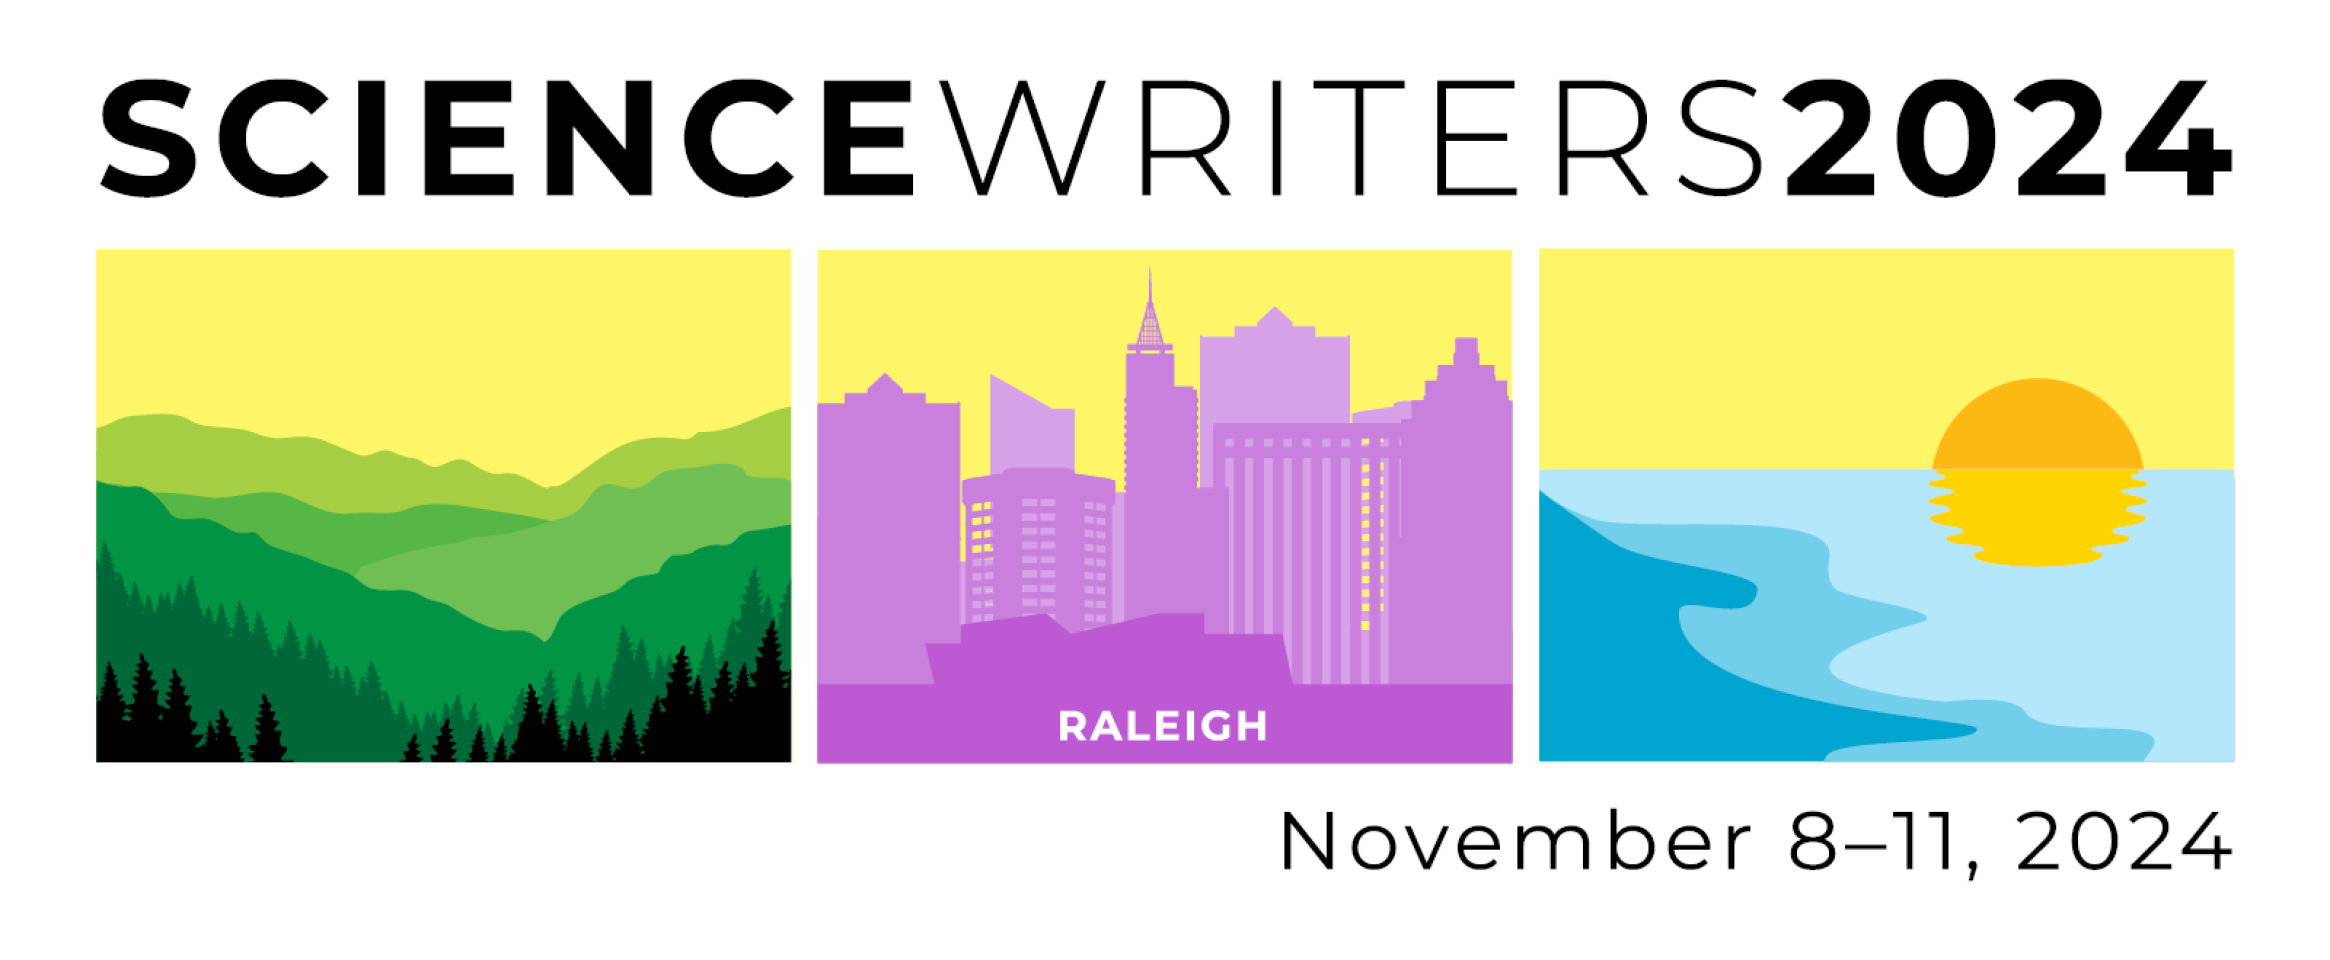 Horizontal graphic with the Science Writers 2024 conference logo, a triptych showing the Blue Ridge Mountains, downtown Raleigh skyline, and the North Carolina coastline with a rising sun.